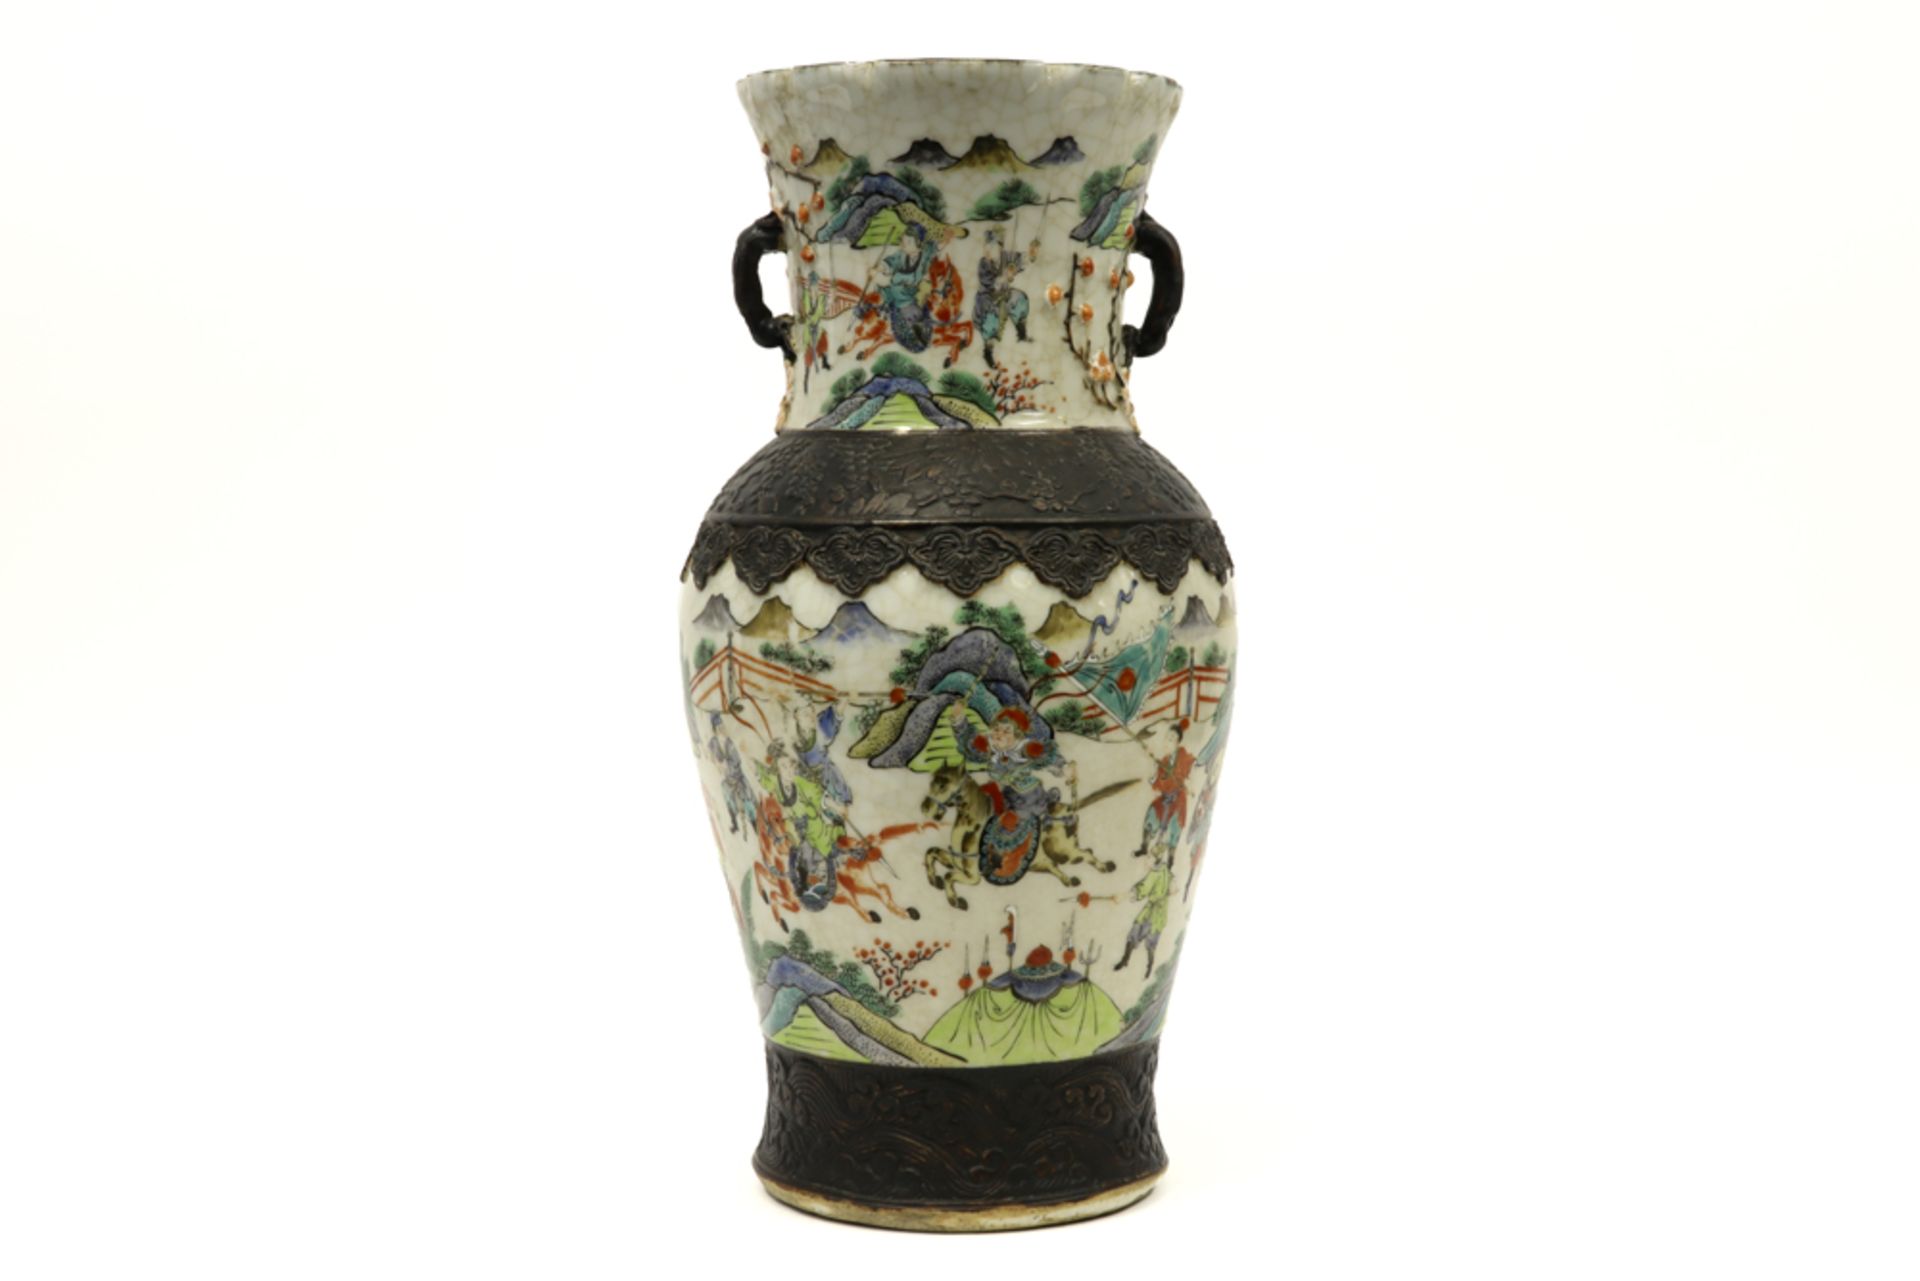 19th Cent. Chinese vase in marked porcelain with a polychrome decor with figures||Negentiende eeuwse